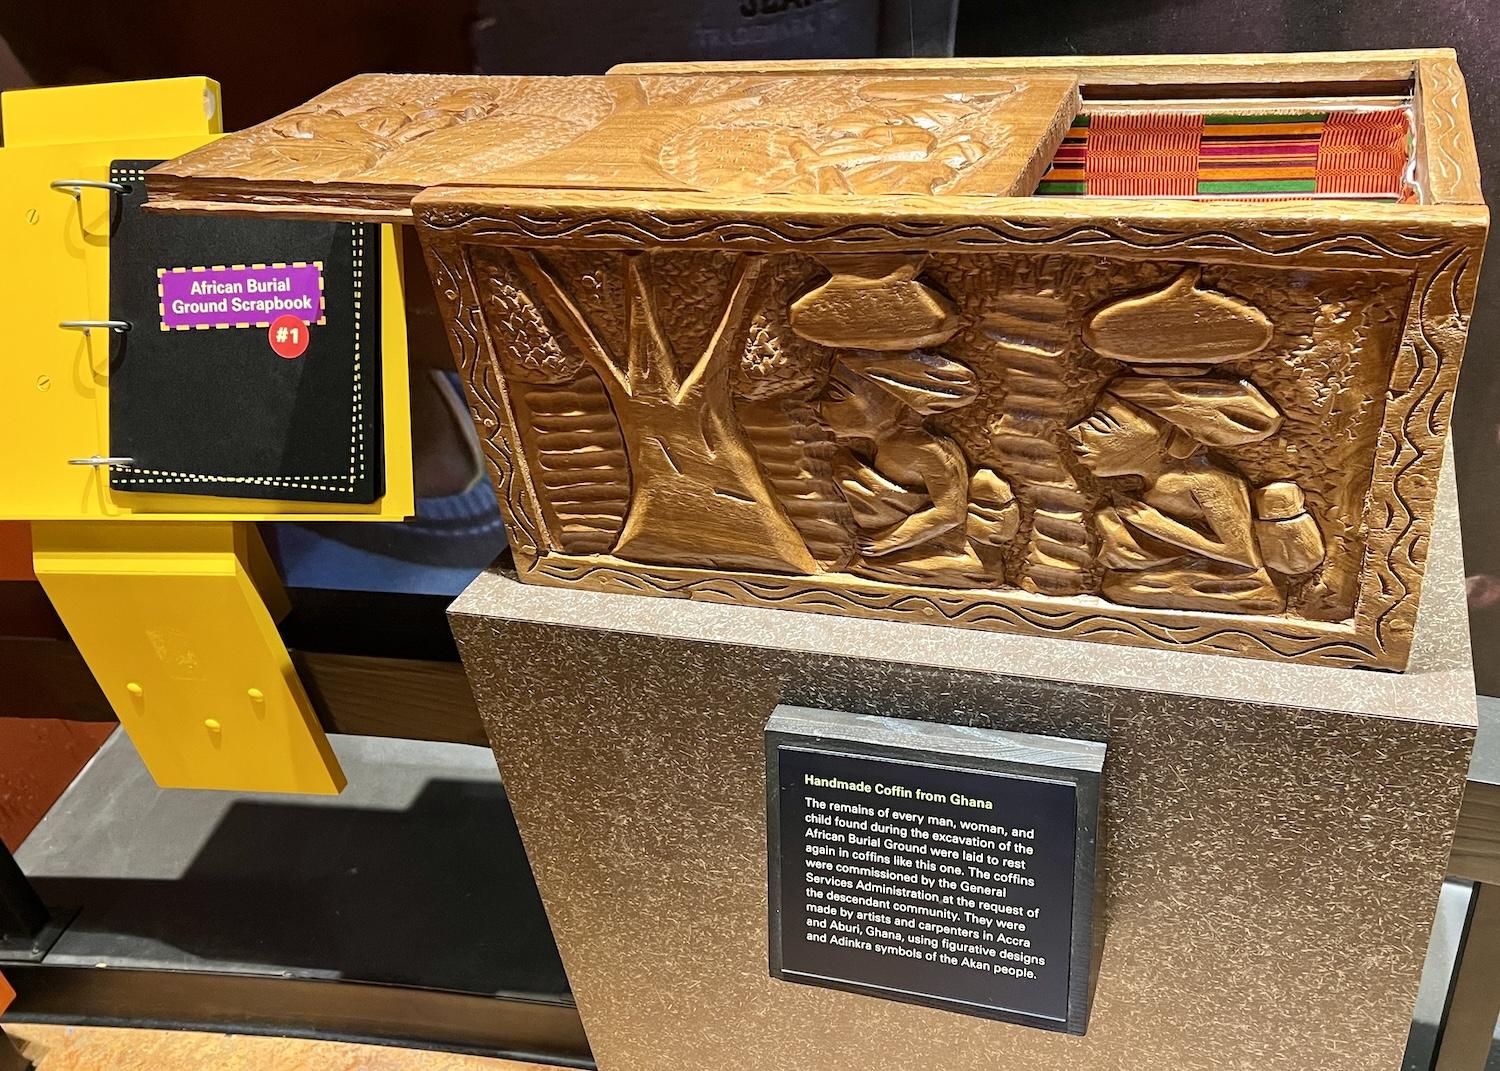 You can touch a handmade coffin from Ghana in the African Burial Ground National Monument visitor center.